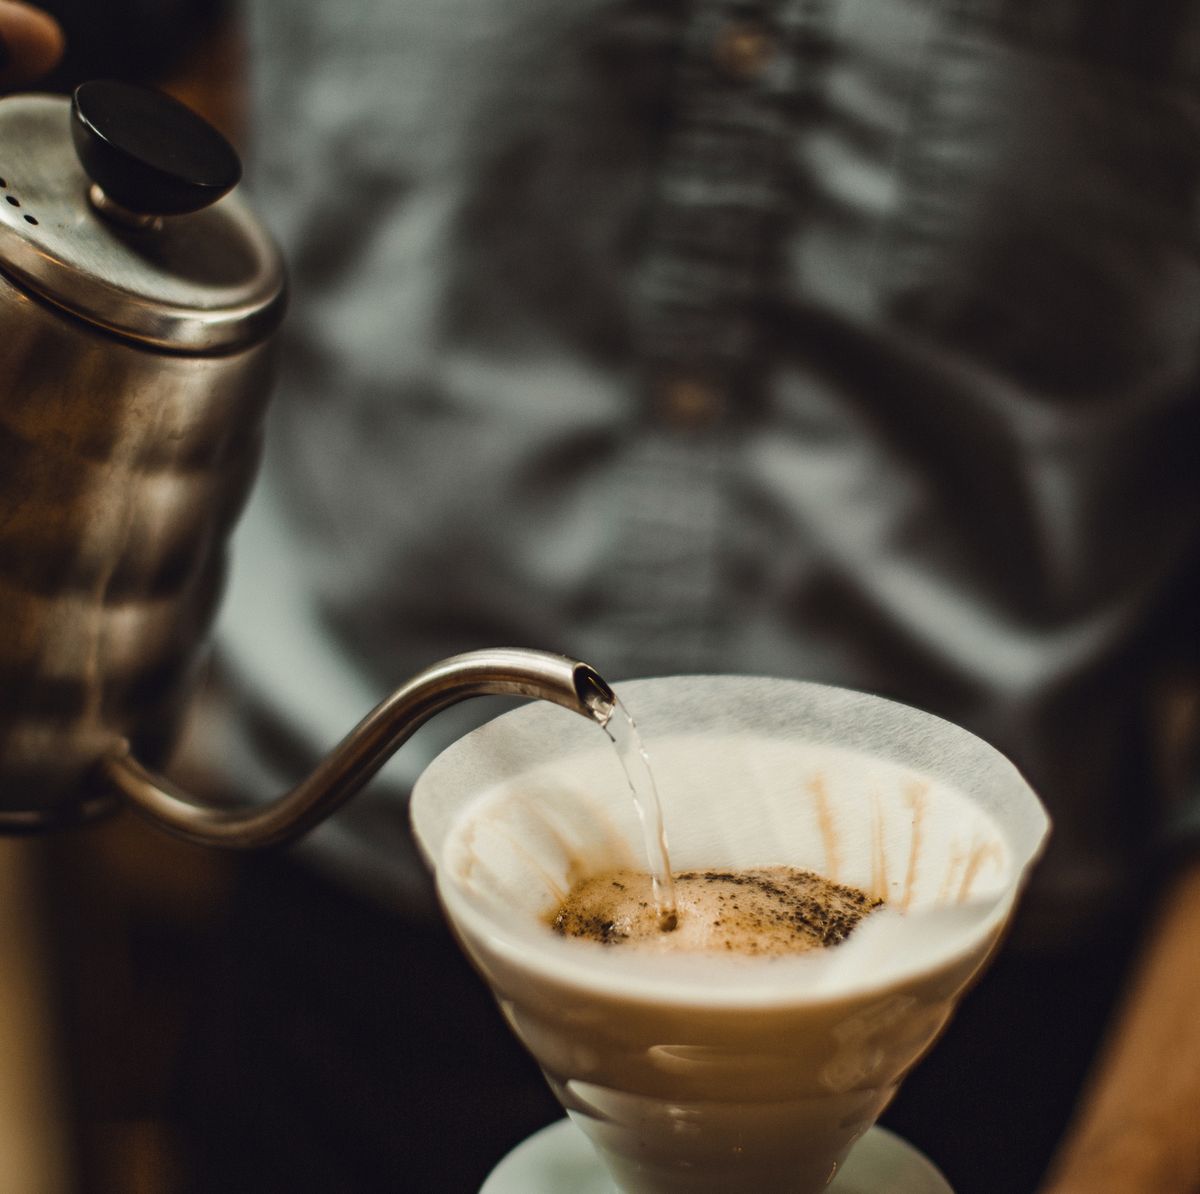 Do People Even Want Pour-Over Coffee Anymore? - Eater